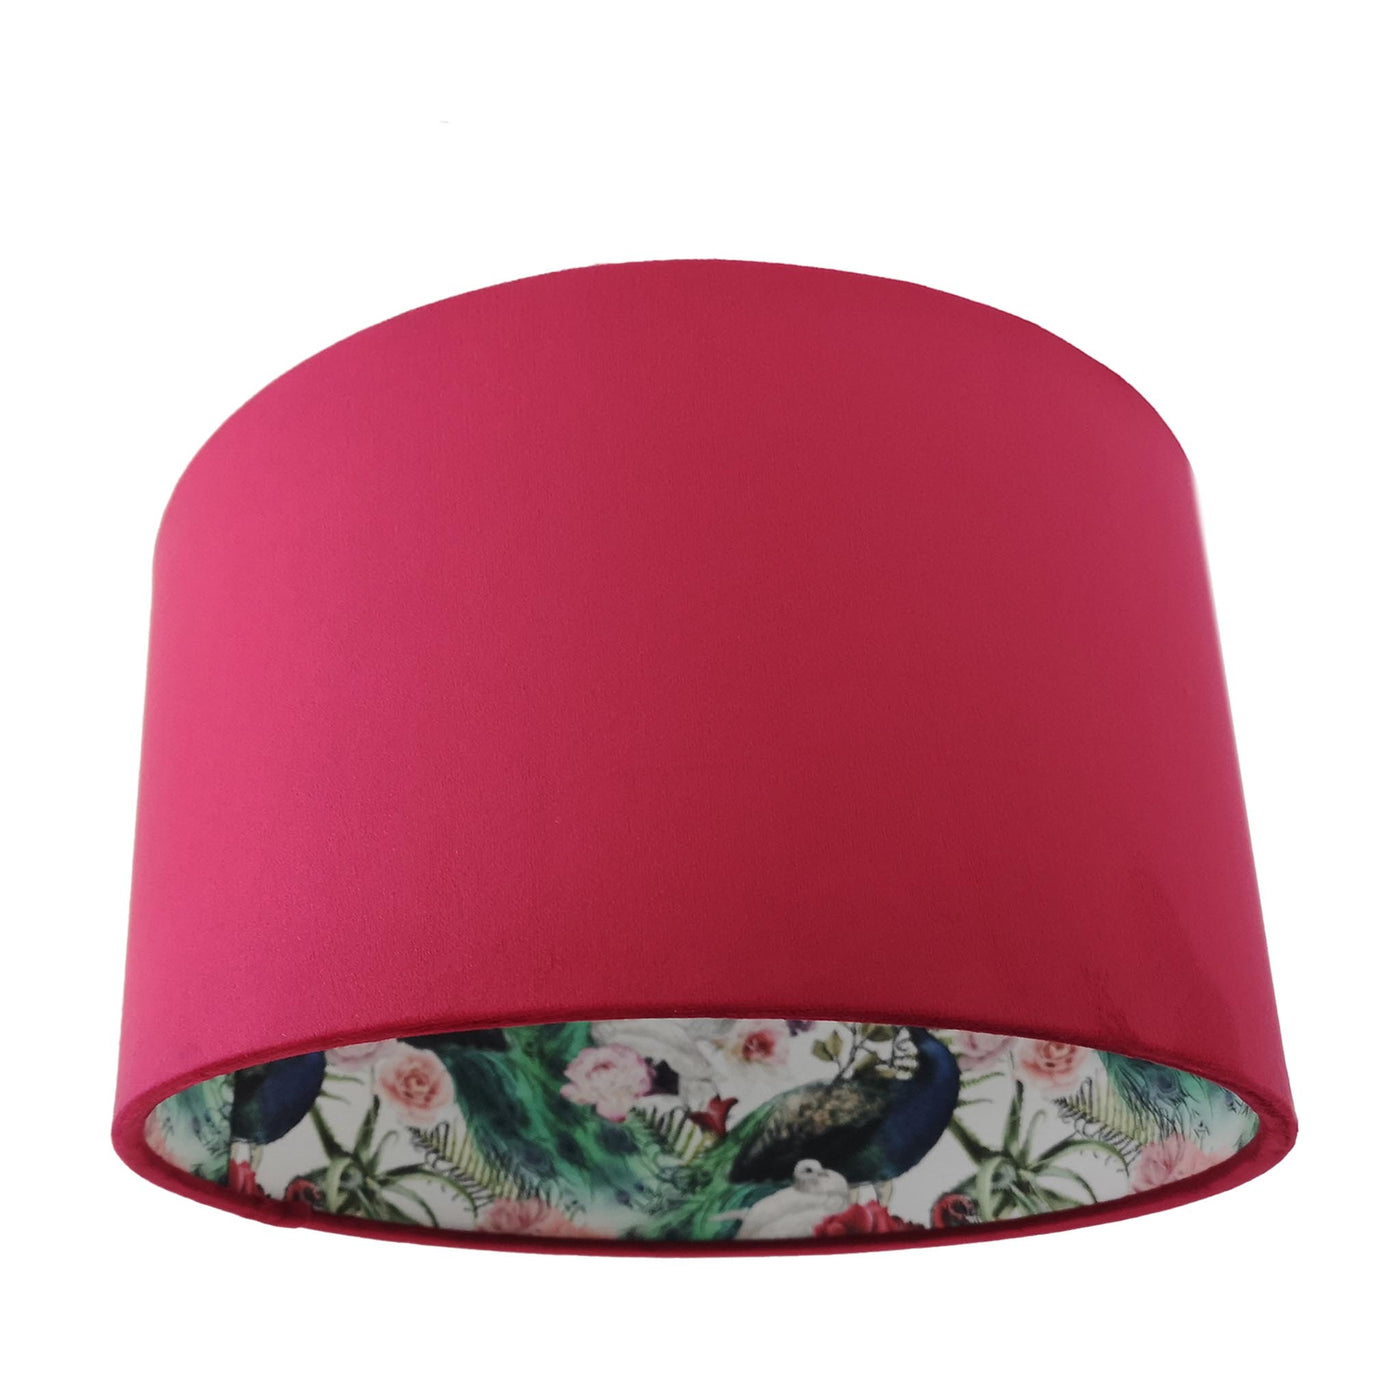 Flamingo and Peacock Feathers Light Shade in Red Claret Velvet